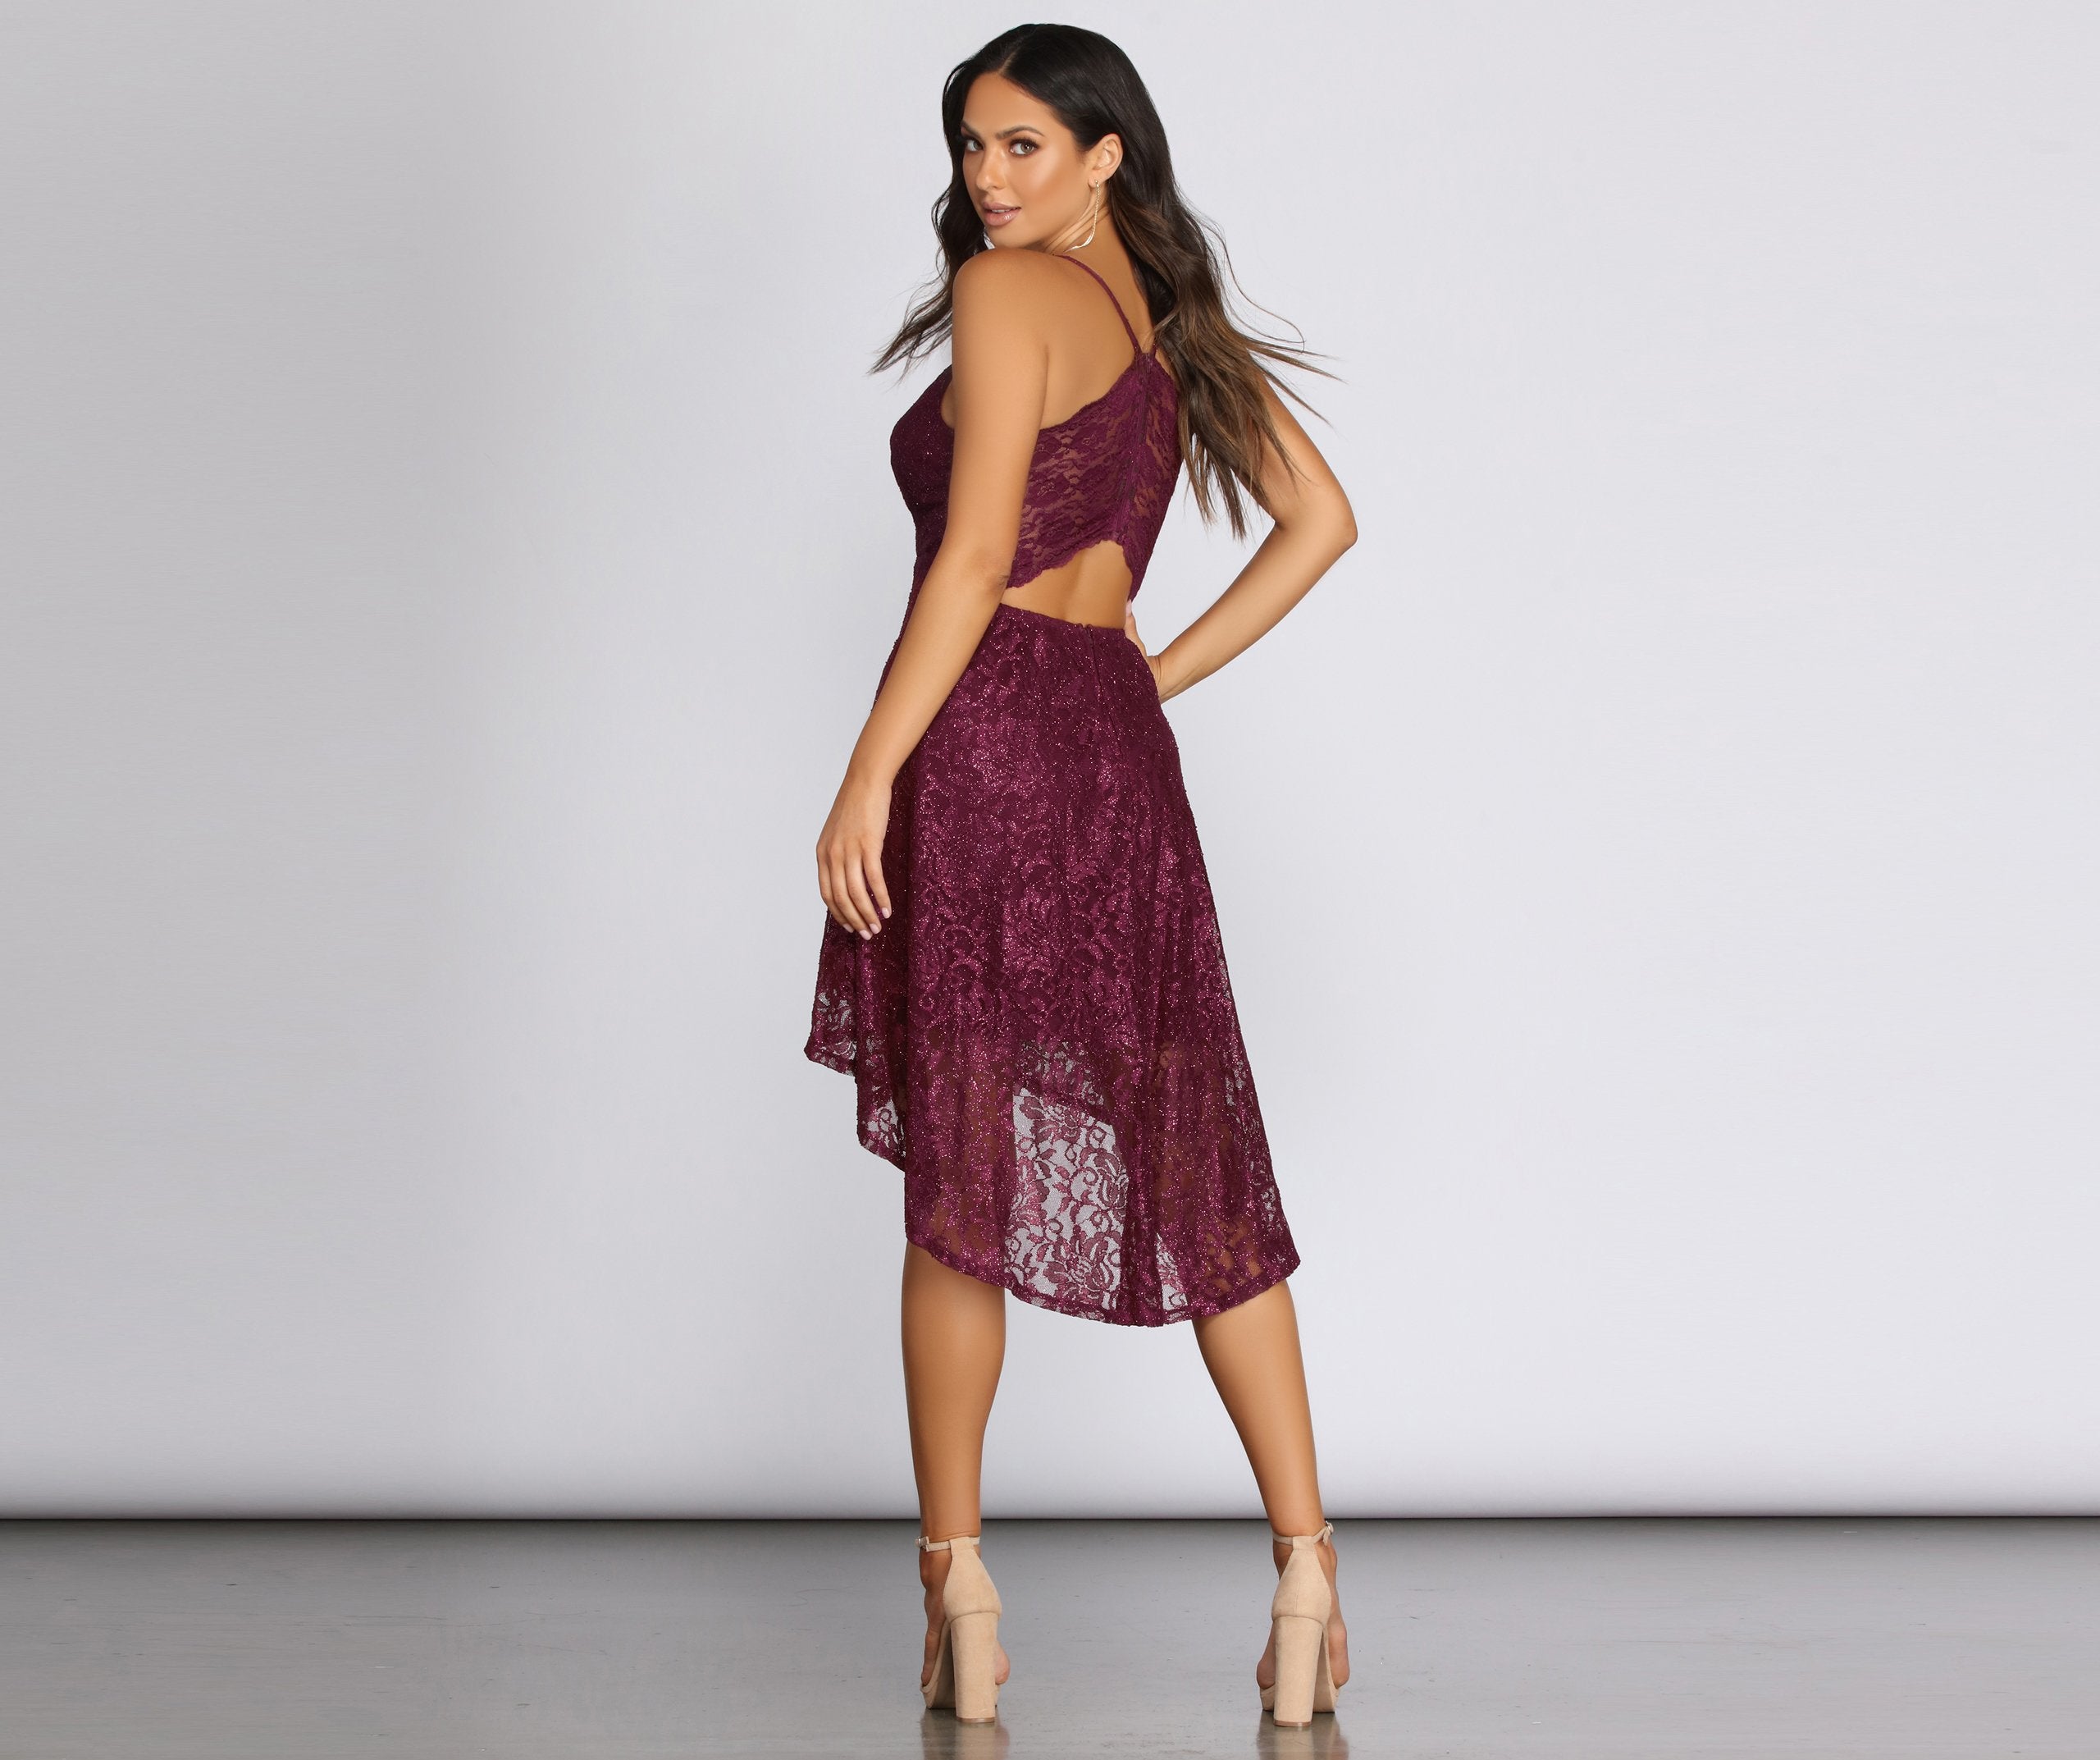 Glimmer And Shimmer Lace Skater Dress - Lady Occasions